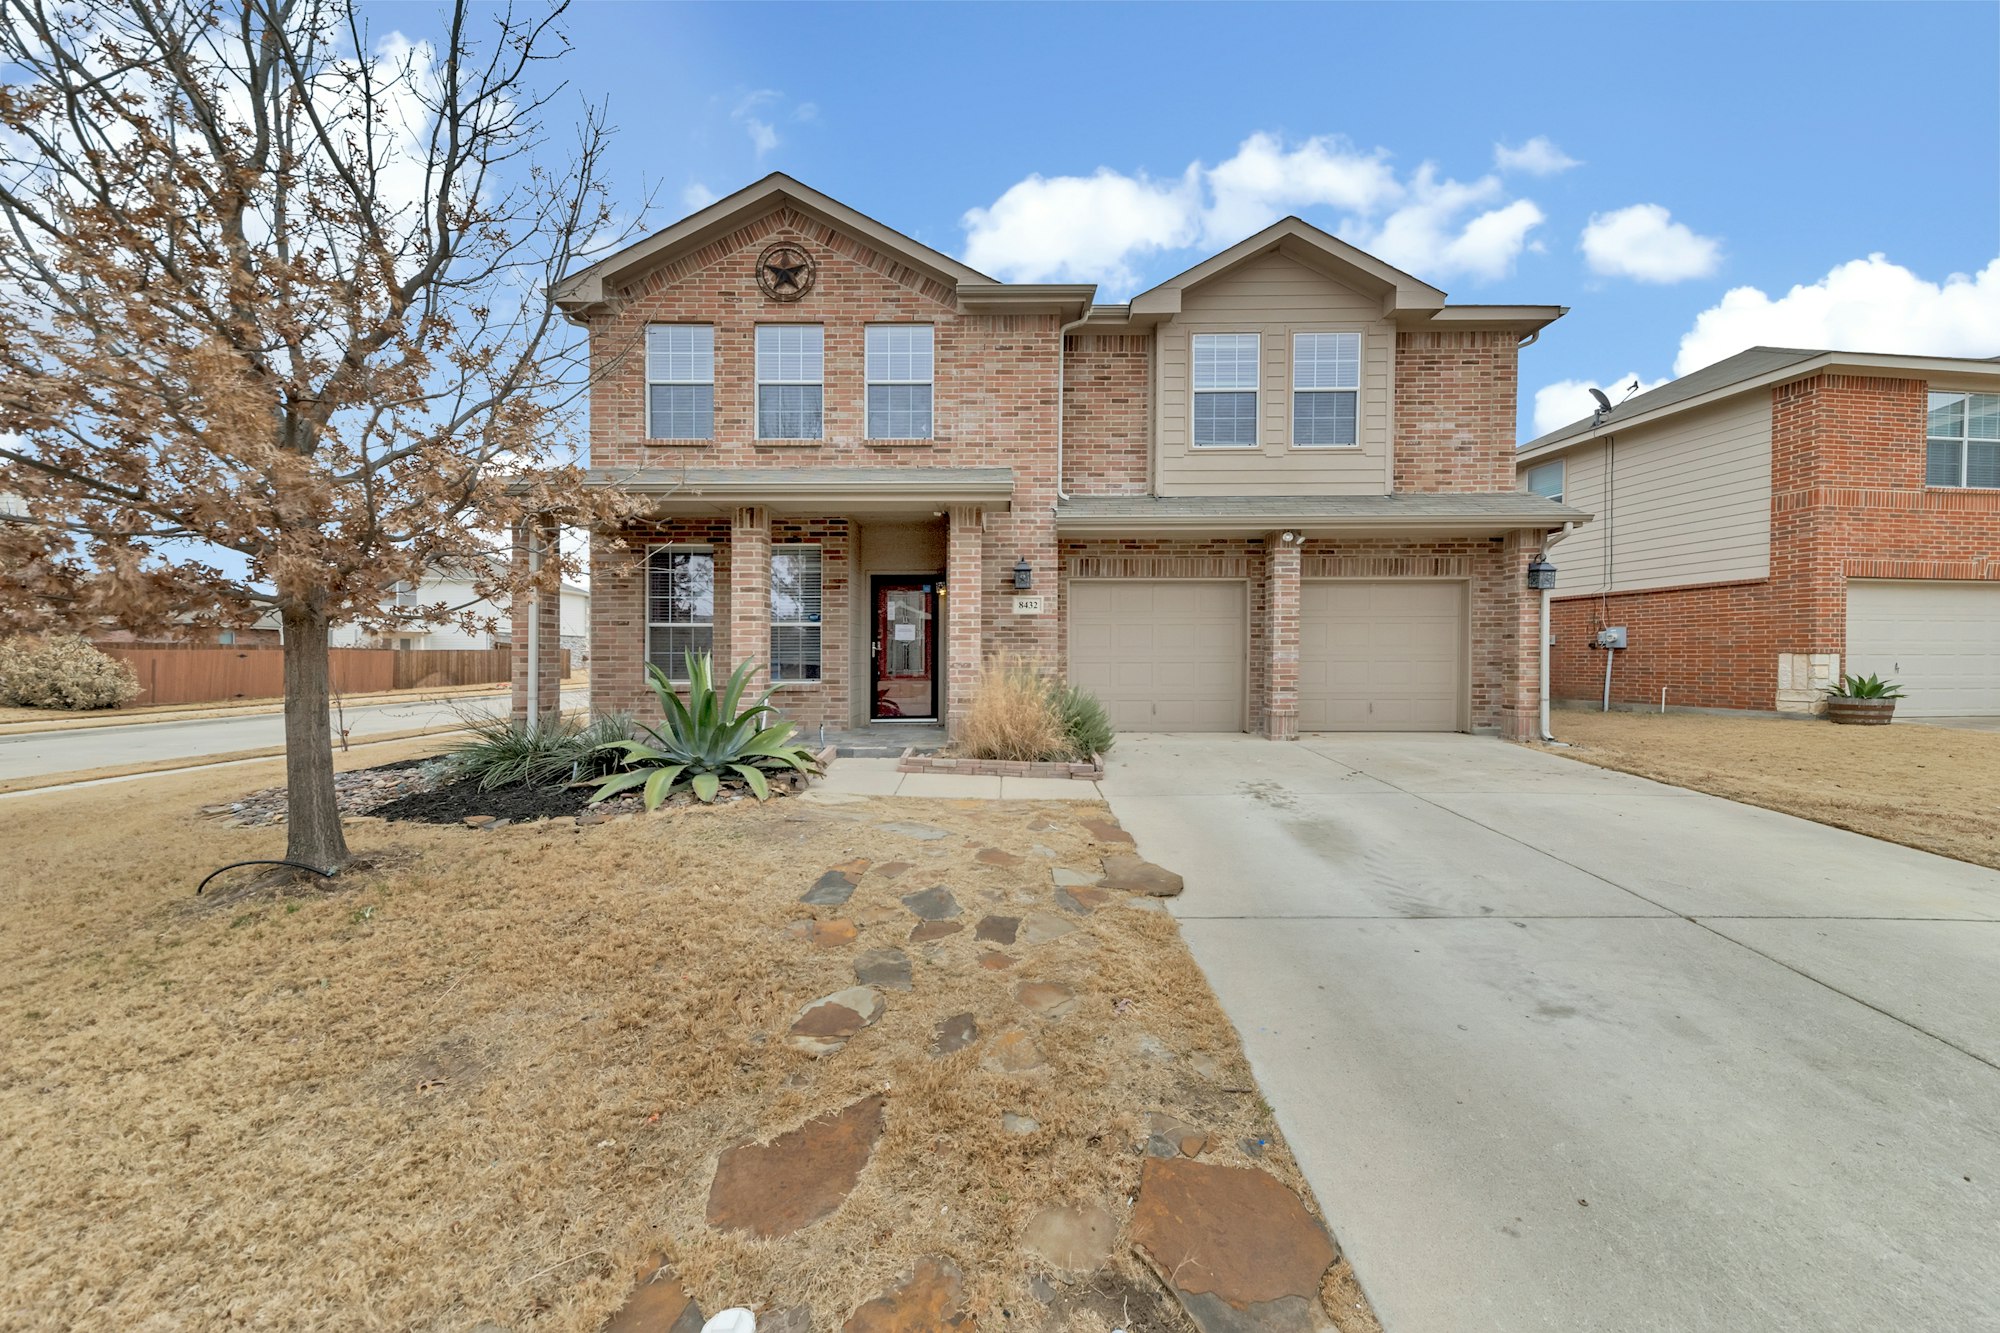 Photo 1 of 35 - 8432 Star Thistle Dr, Fort Worth, TX 76179